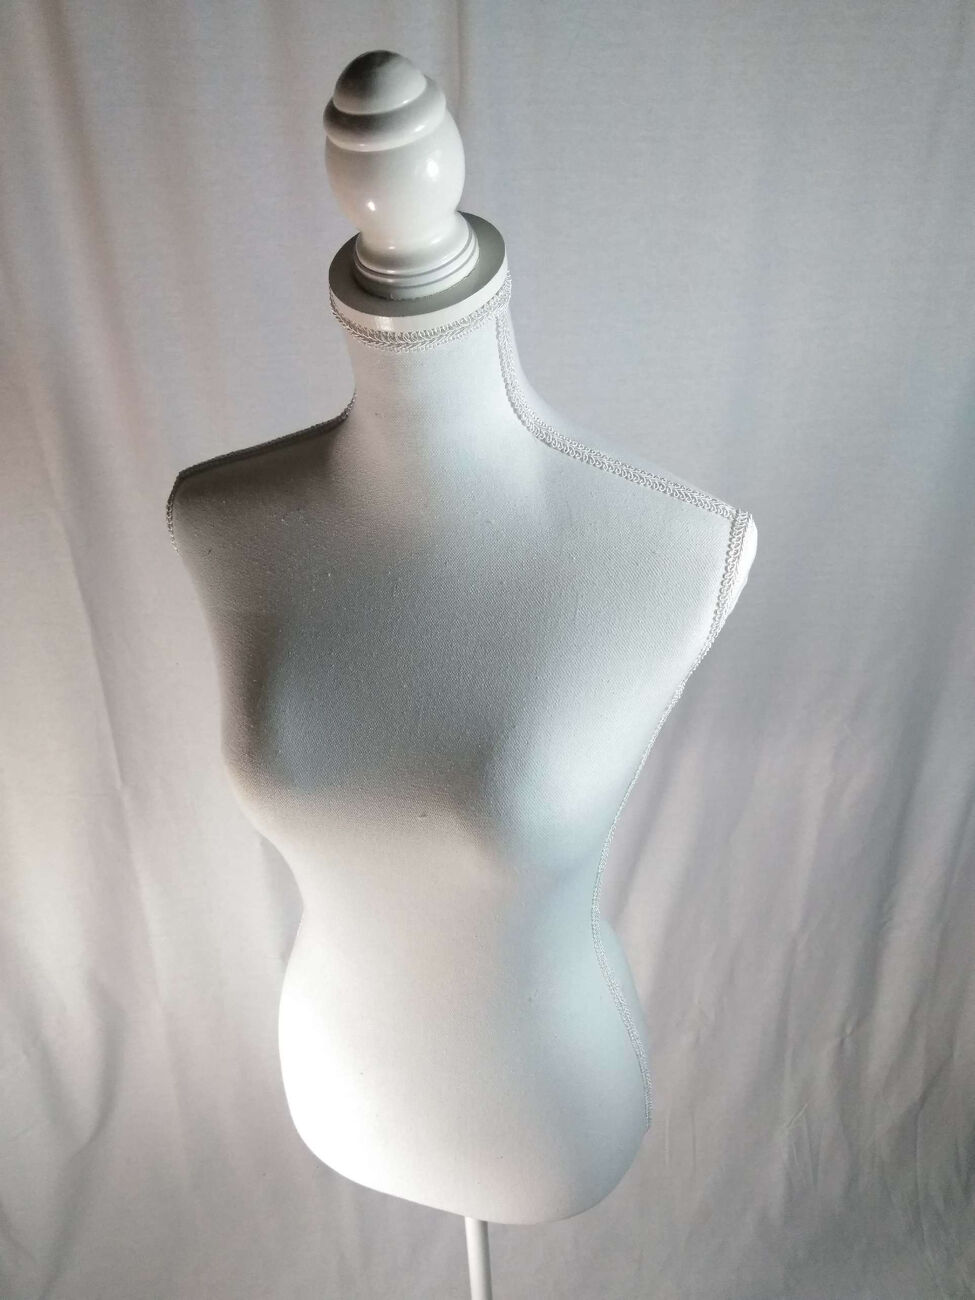 Female Solid White Mannequin by Urban Port